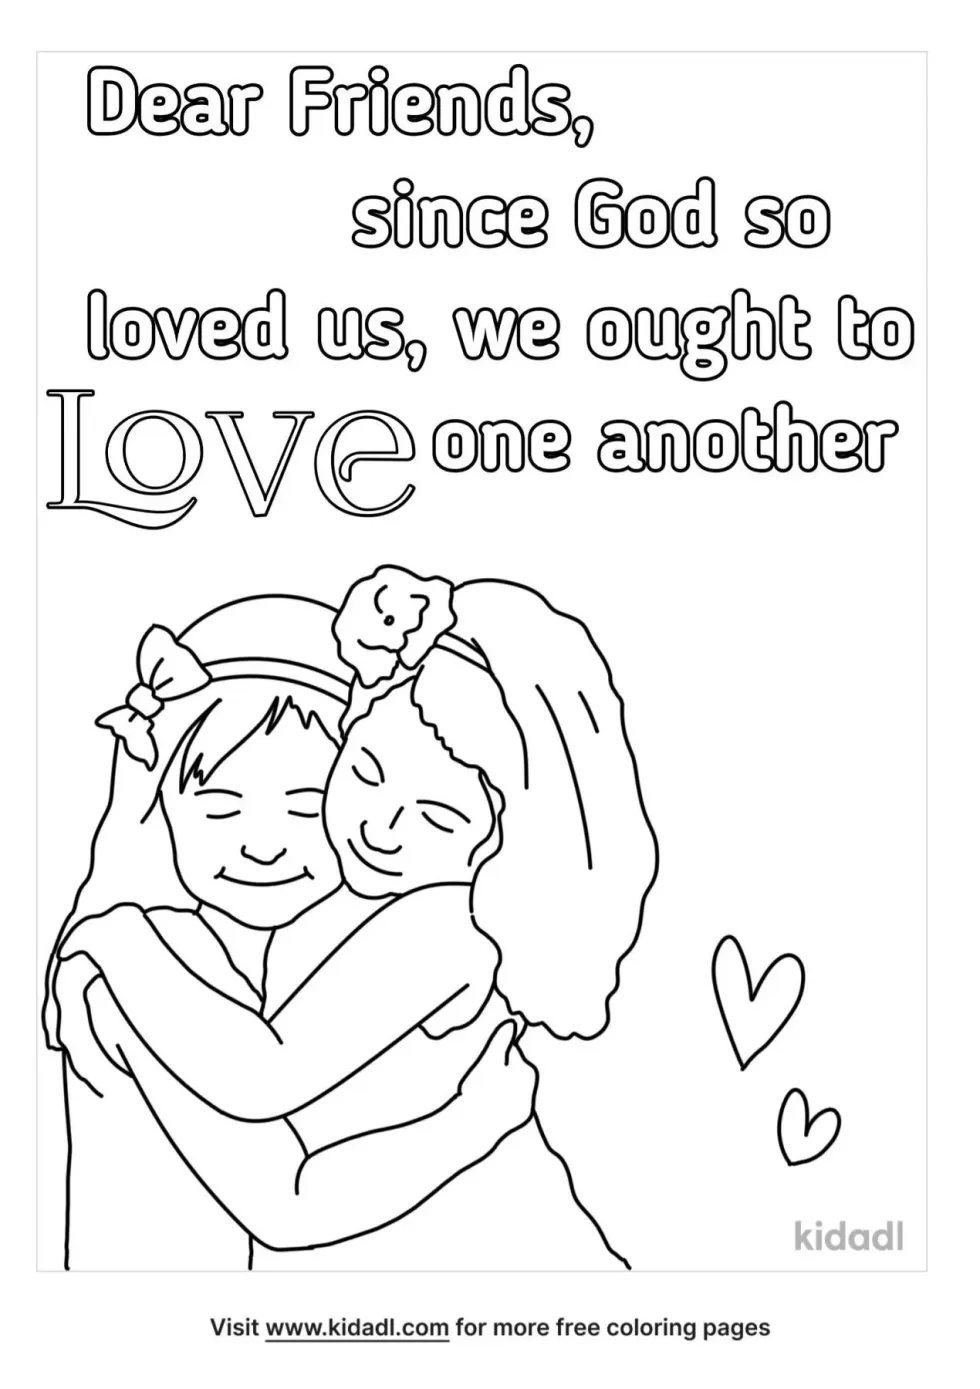 We Should Love One Another Coloring Page